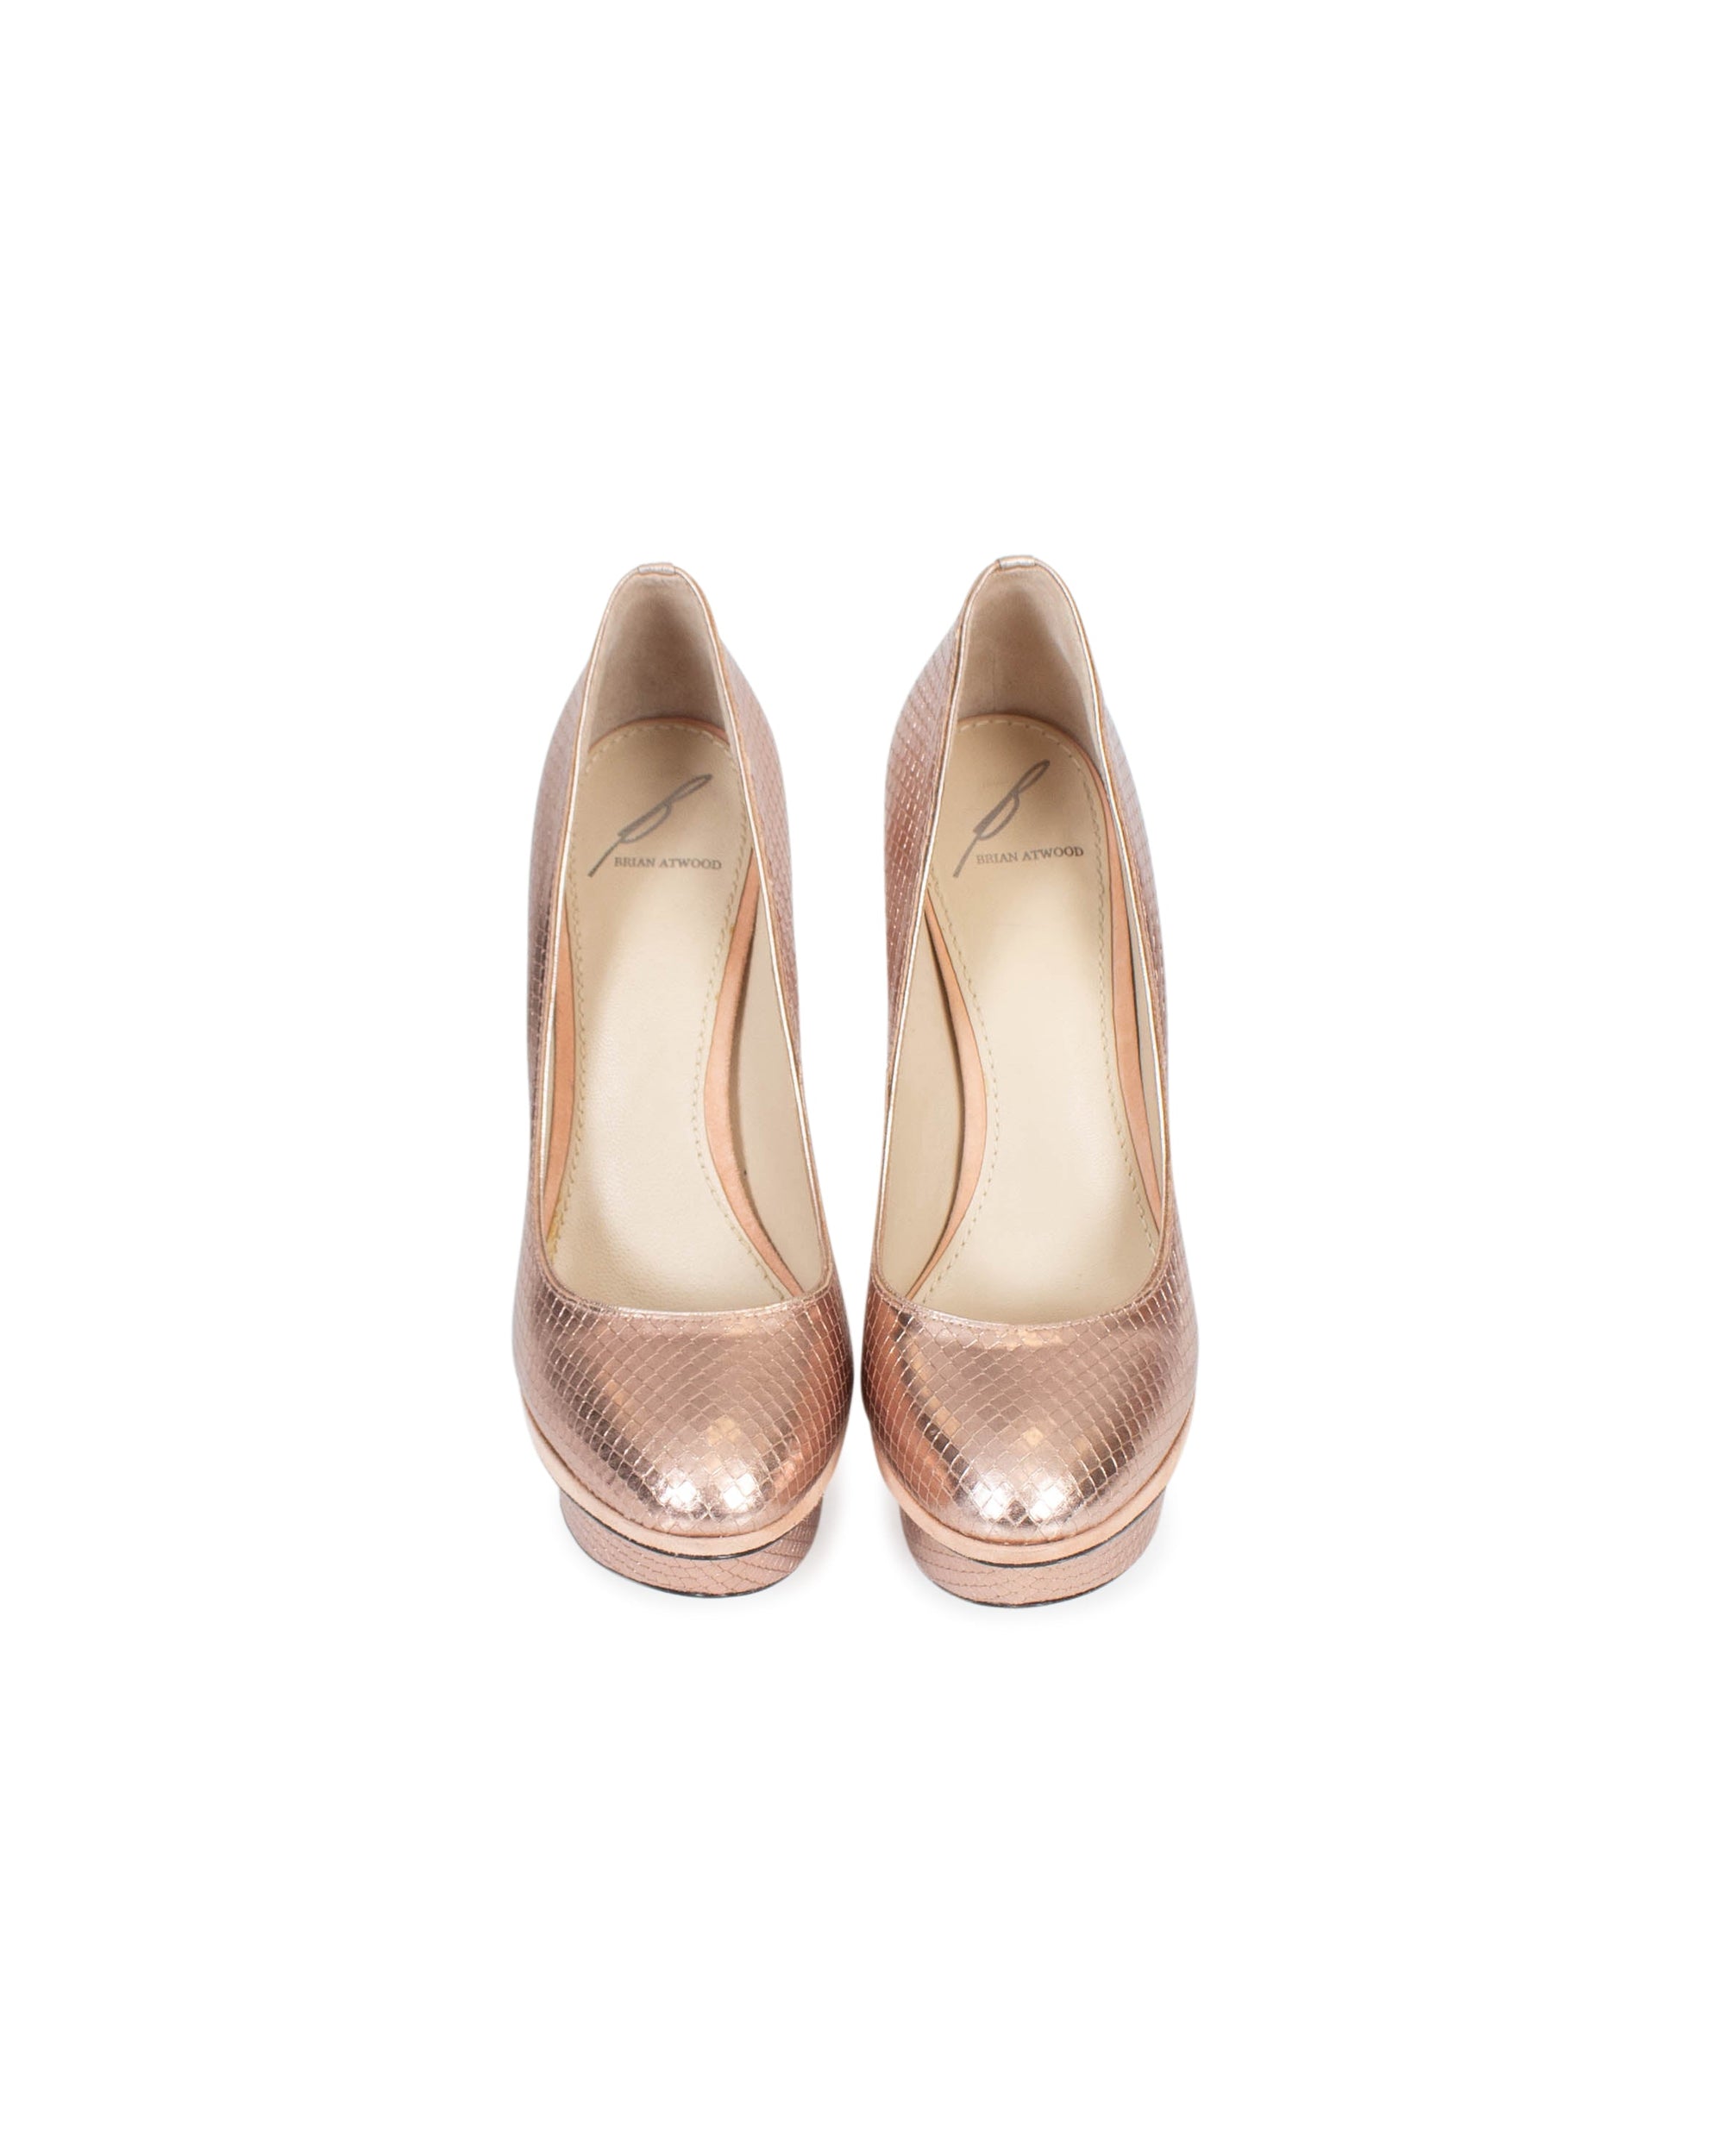 Casey Champagne Gold - High-heeled sandals with thin straps in gold lamé  leather - Wedding shoes for bride and ceremony